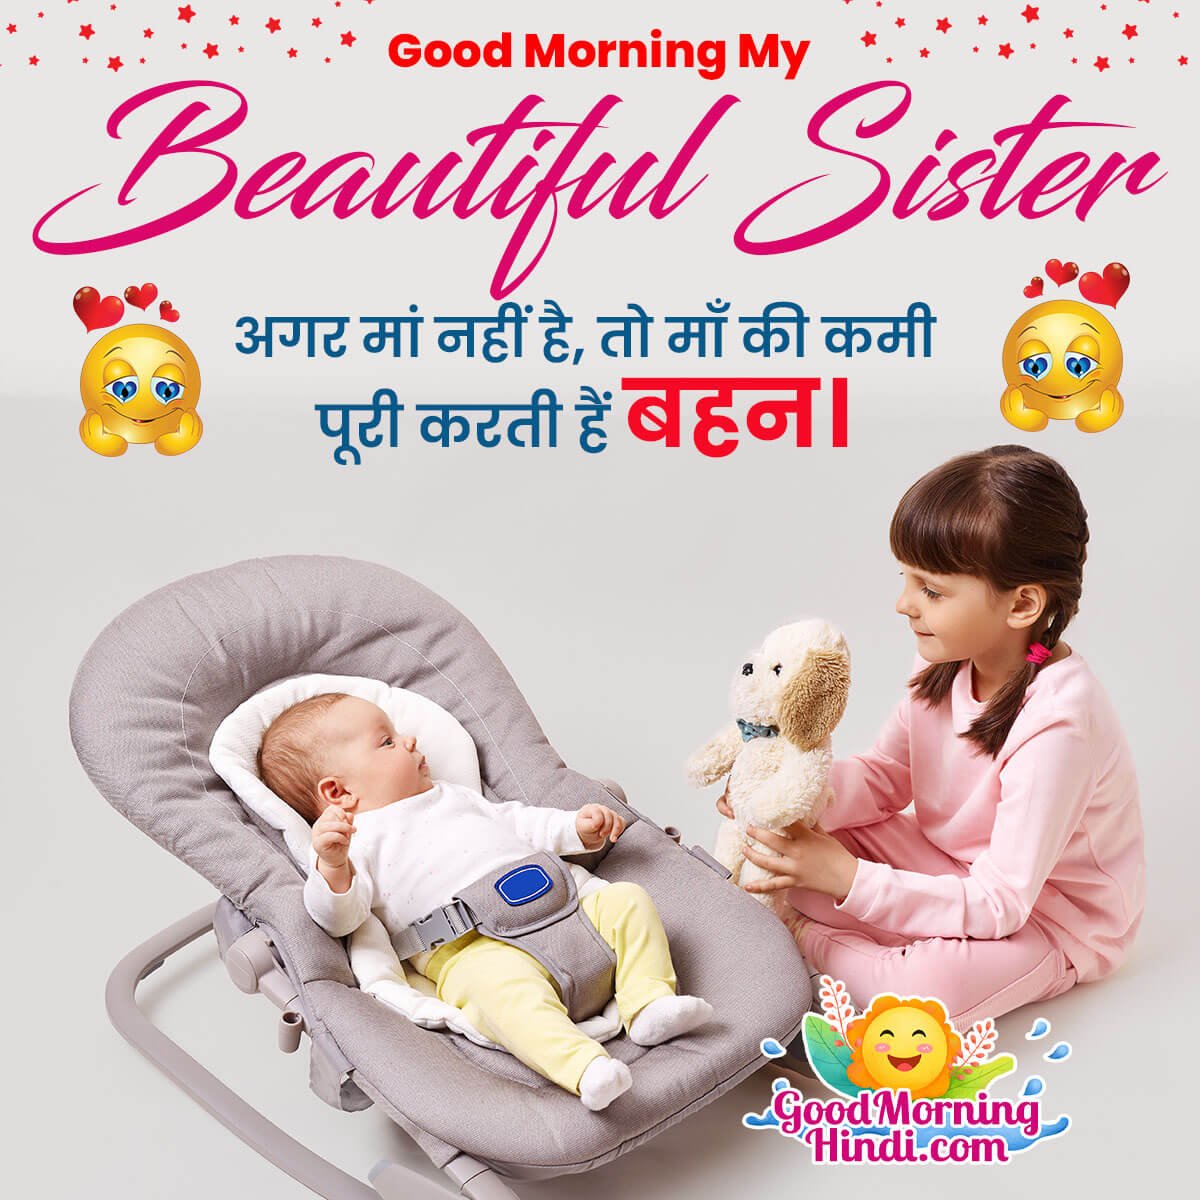 Good Morning Messages For Sister In Hindi - Good Morning Wishes ...